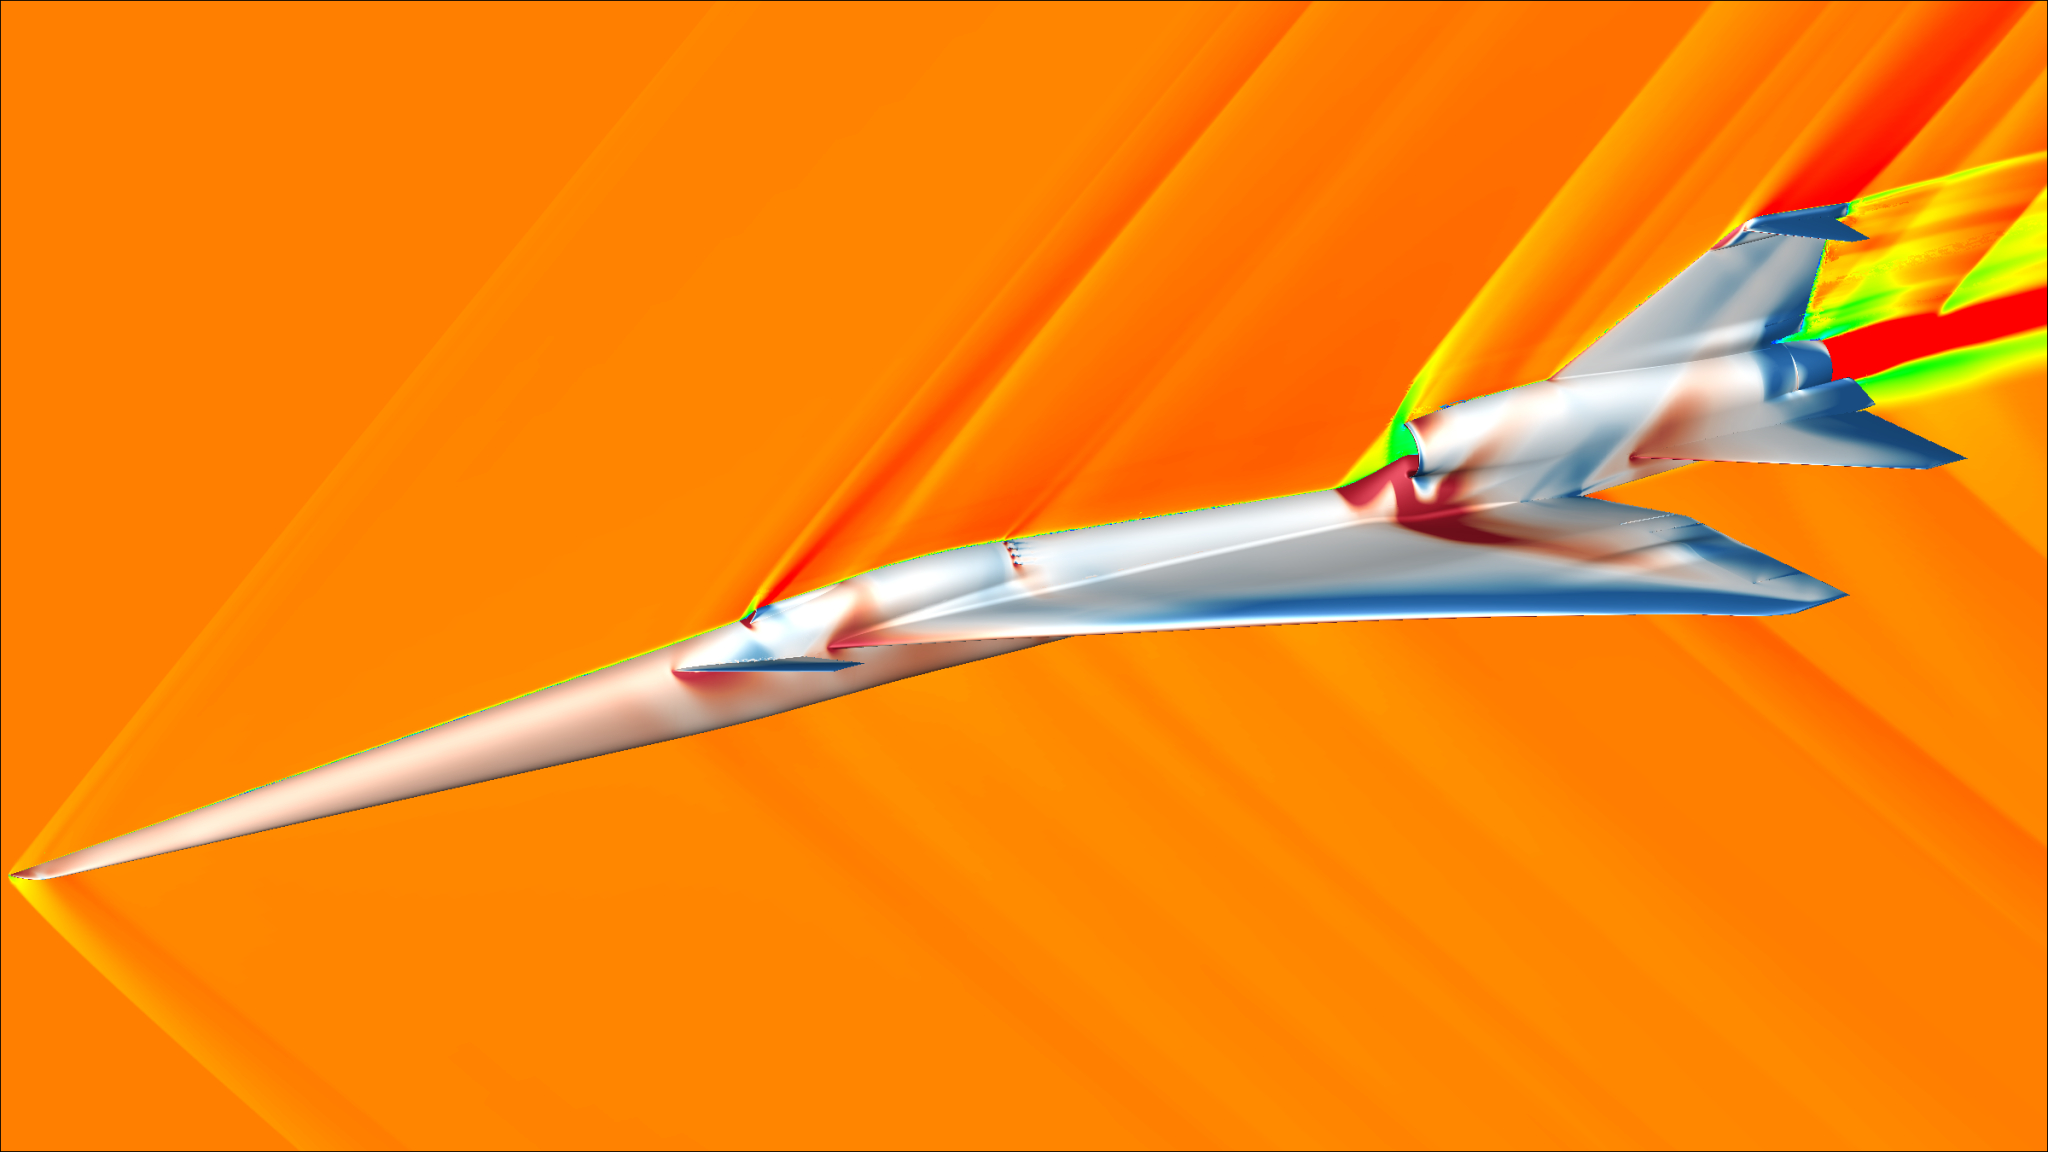 The image shows a moment from a computational fluid dynamics simulation of the X-59 aircraft concept during supersonic flight.